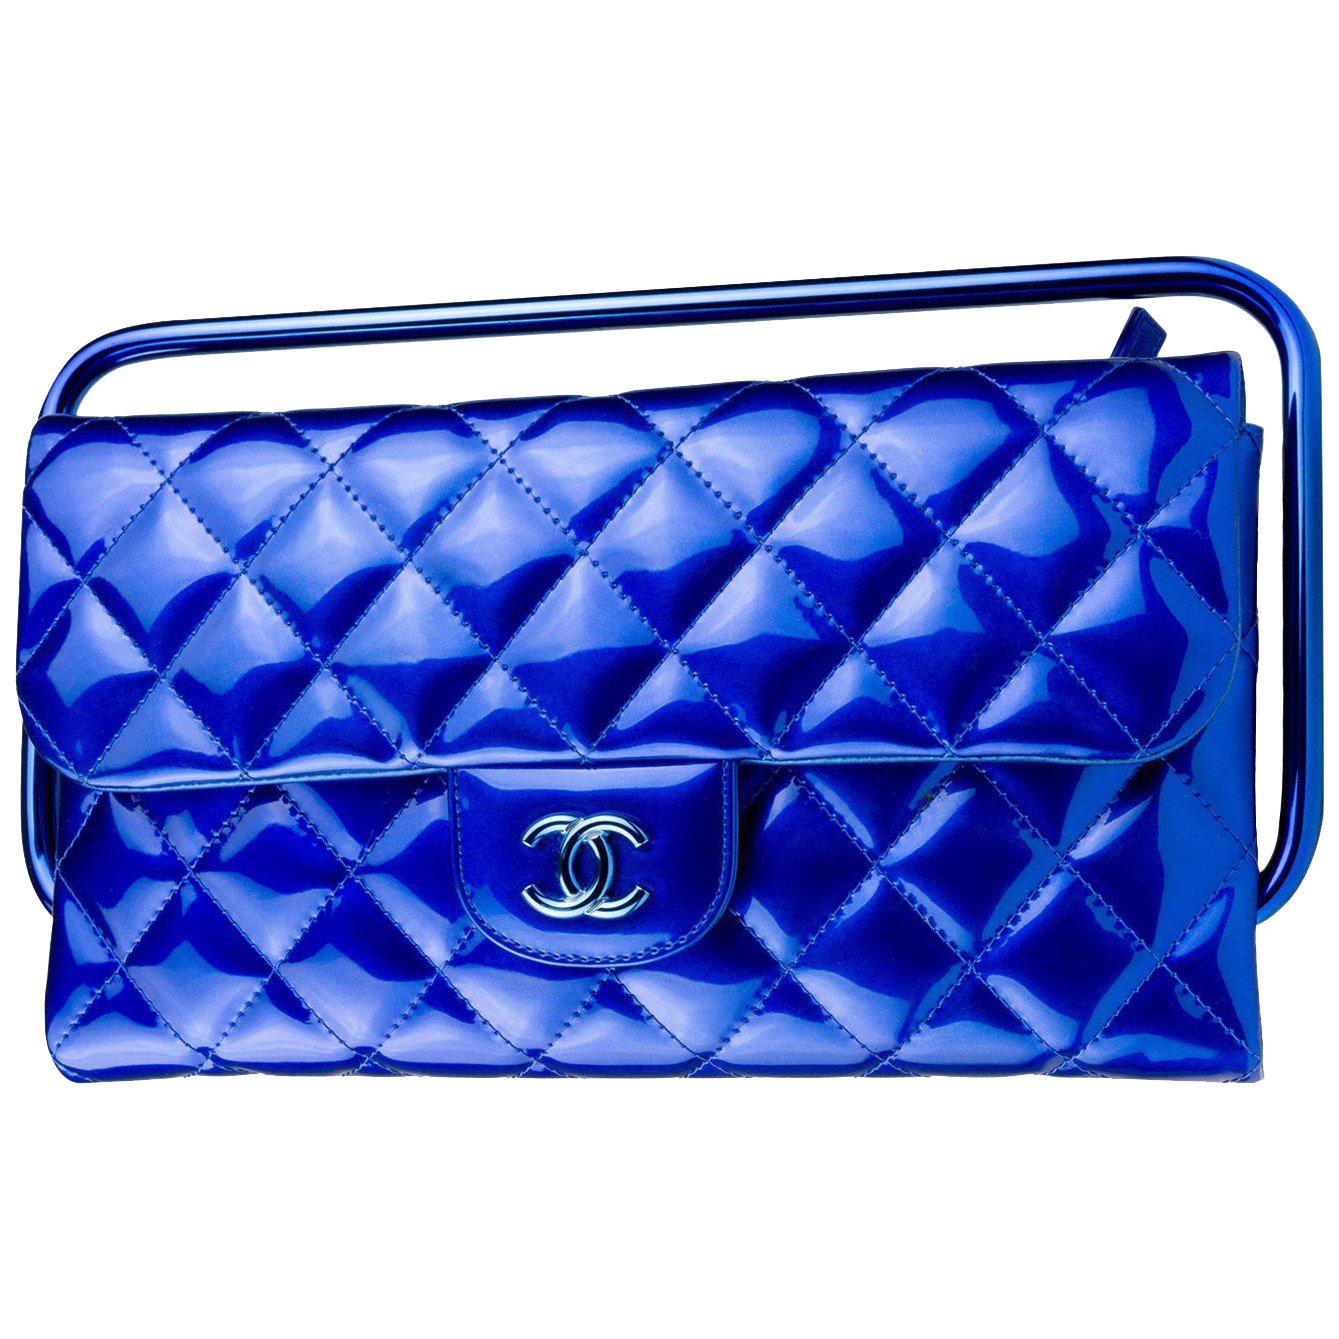 Chanel 2014 Electric Blue Patent Leather Quilted Retractable Frame Clutch Bag